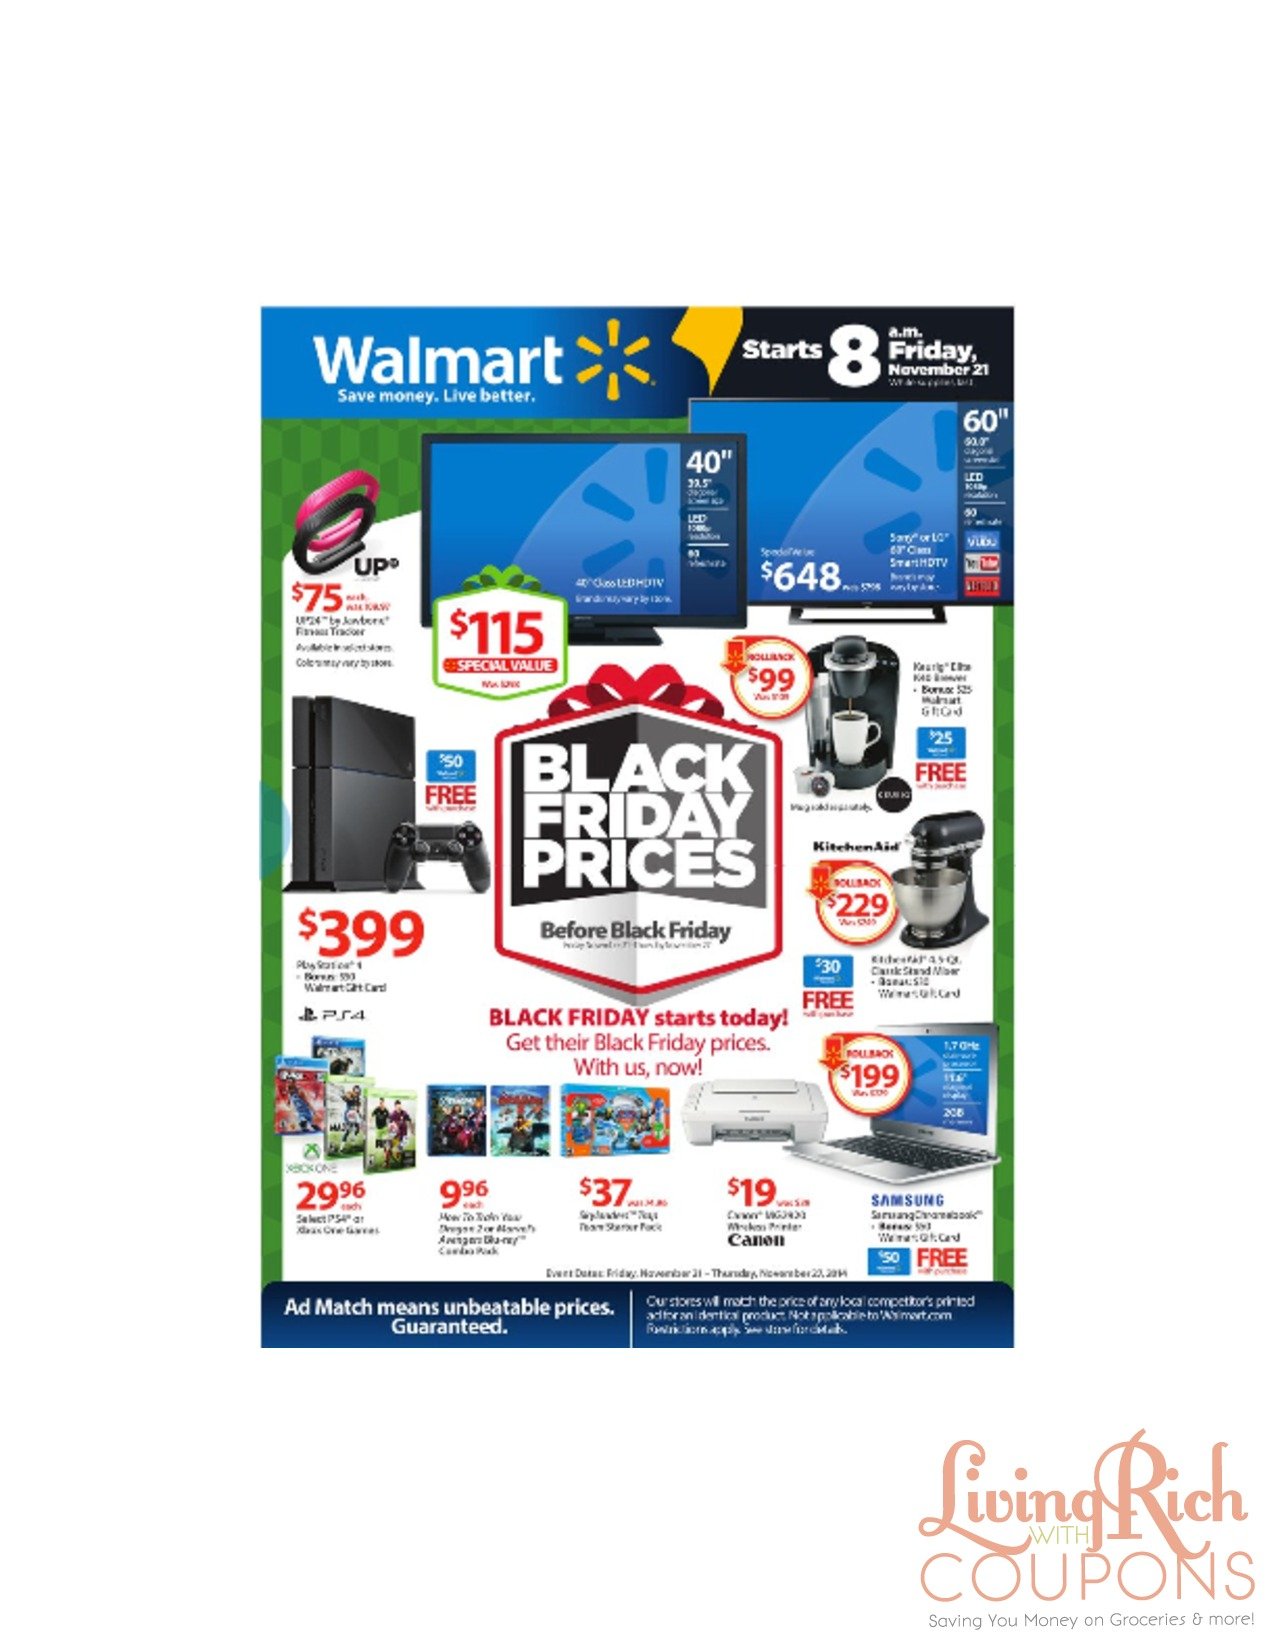 Walmart Black Friday 2014 - Black Friday Ads -Living Rich With Coupons®